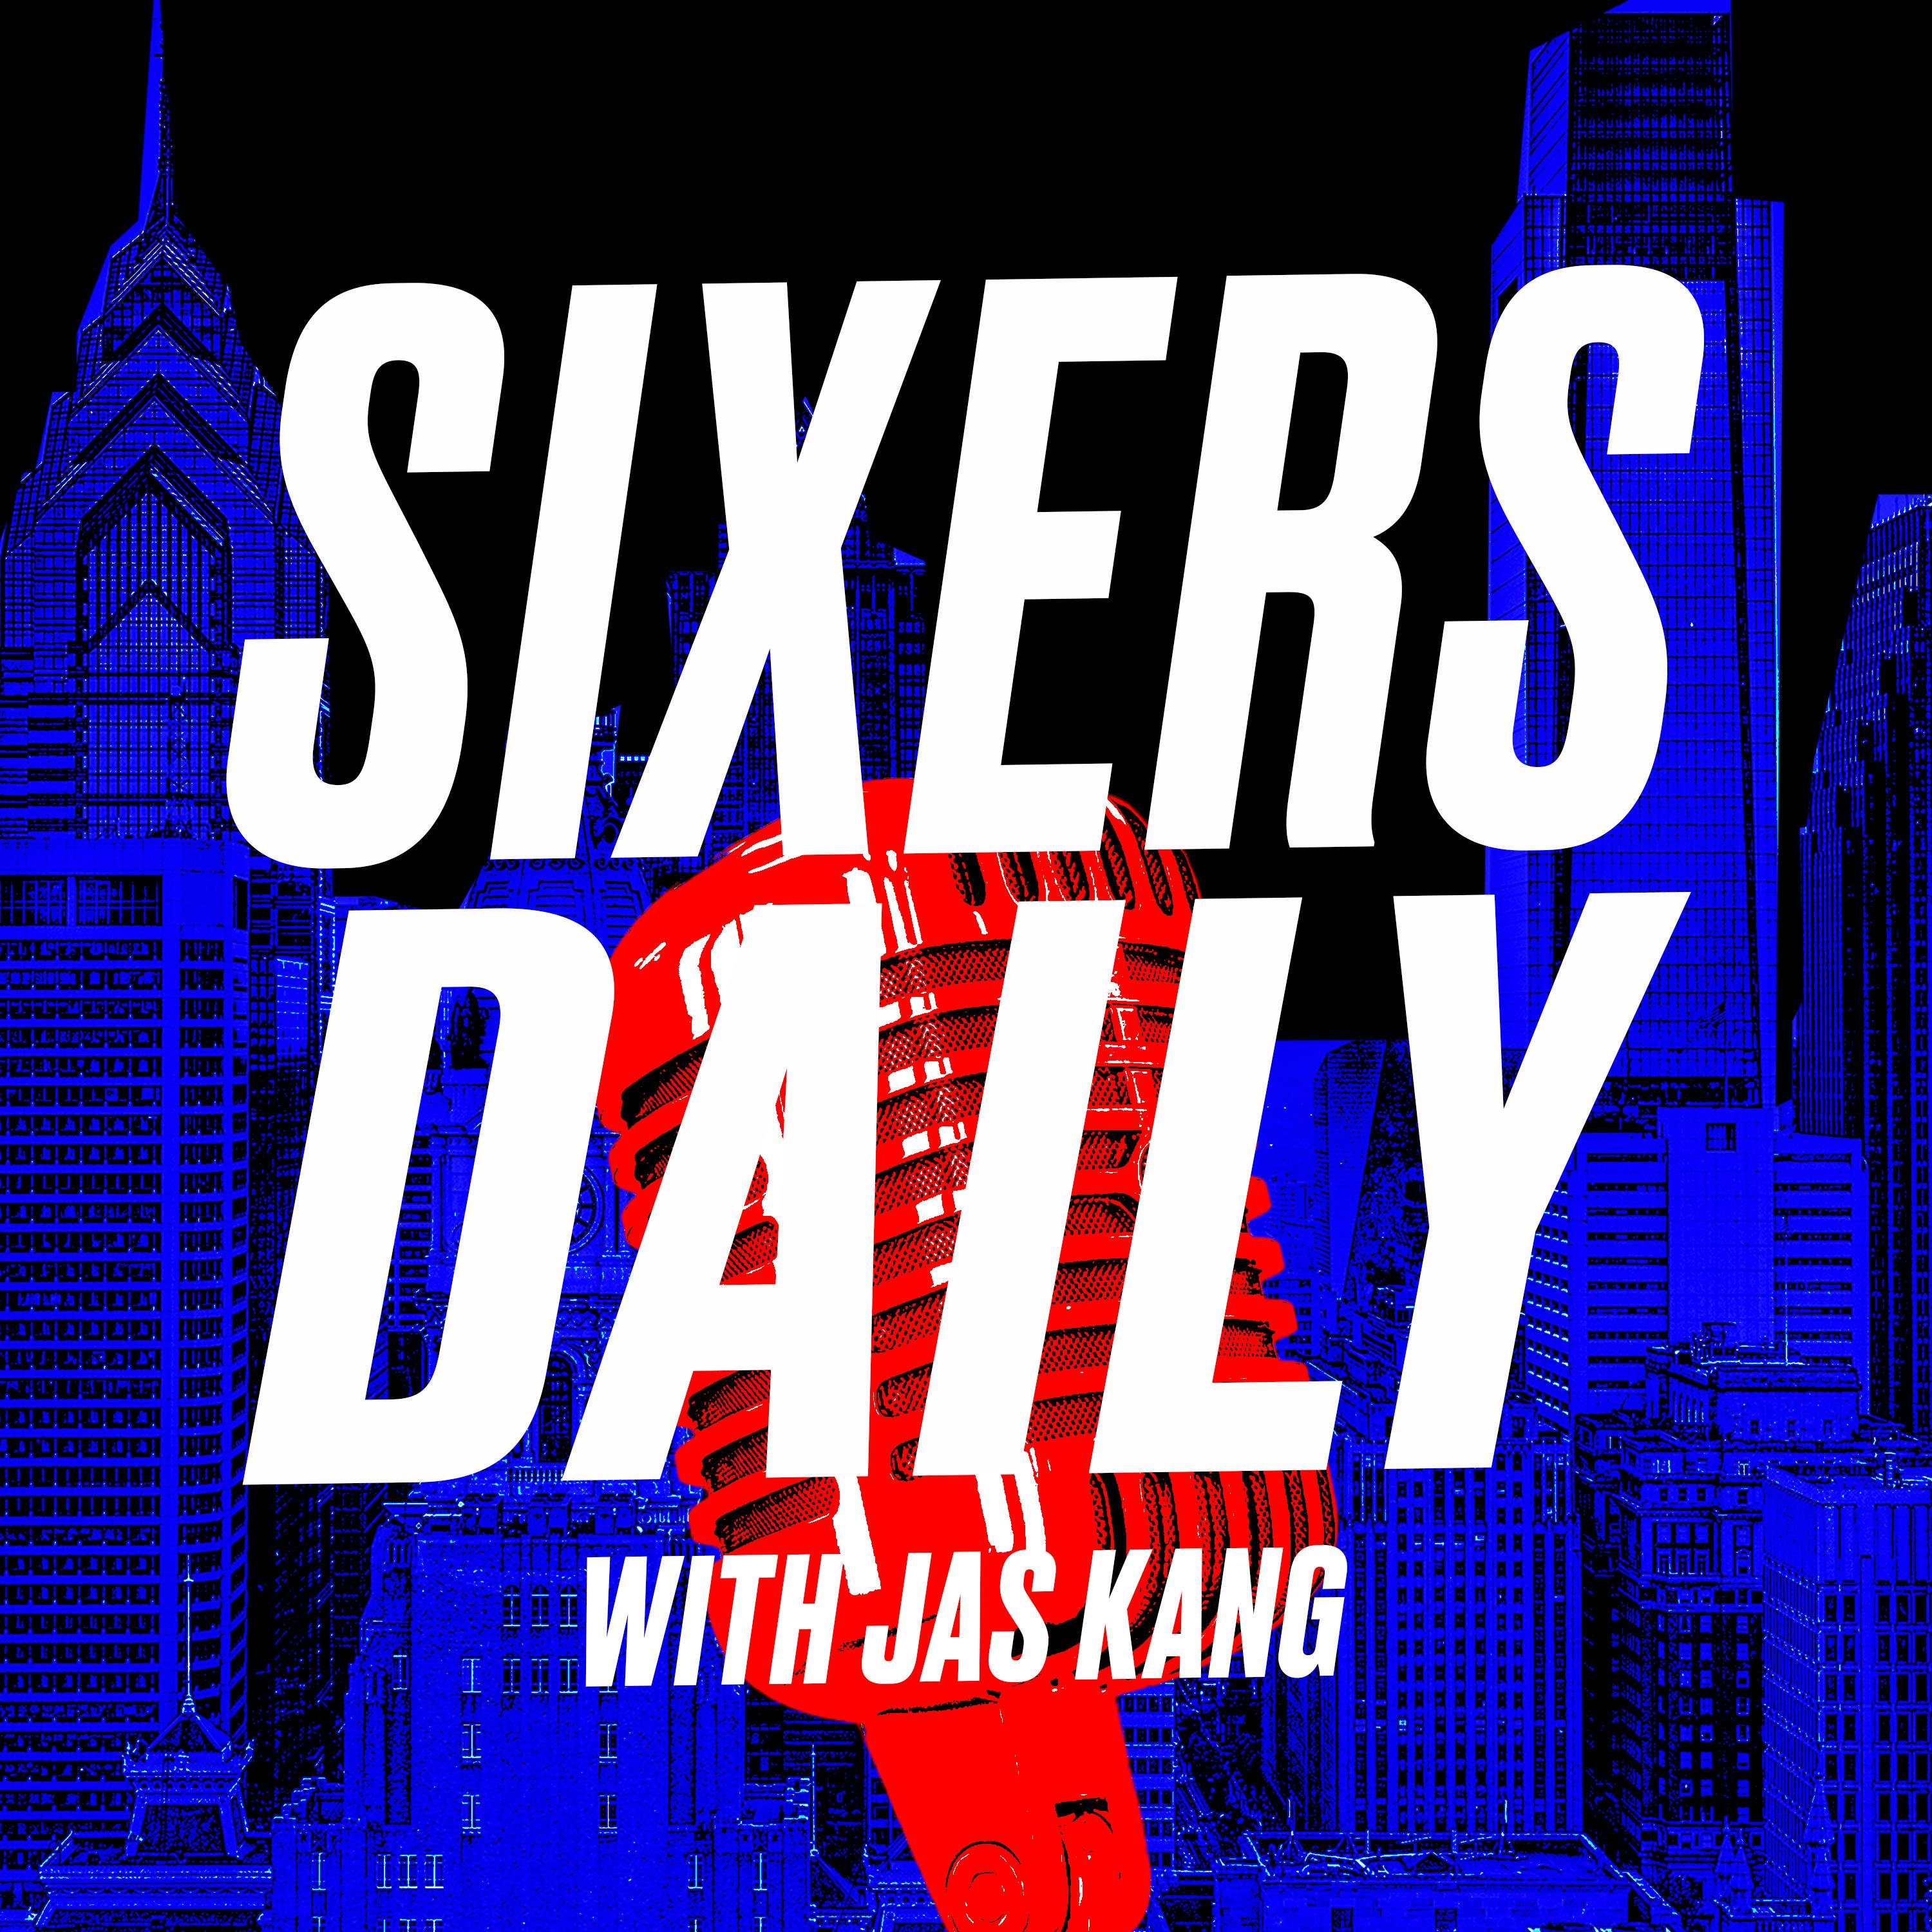 Sixers Daily with Jas Kang - Paul Hudrick joins Jas to discuss the Sixers defensive versatility with their new additions. Plus, Adam Taylor of Celtics Blog on the Kevin Durant-Jaylen Brown trade rumor